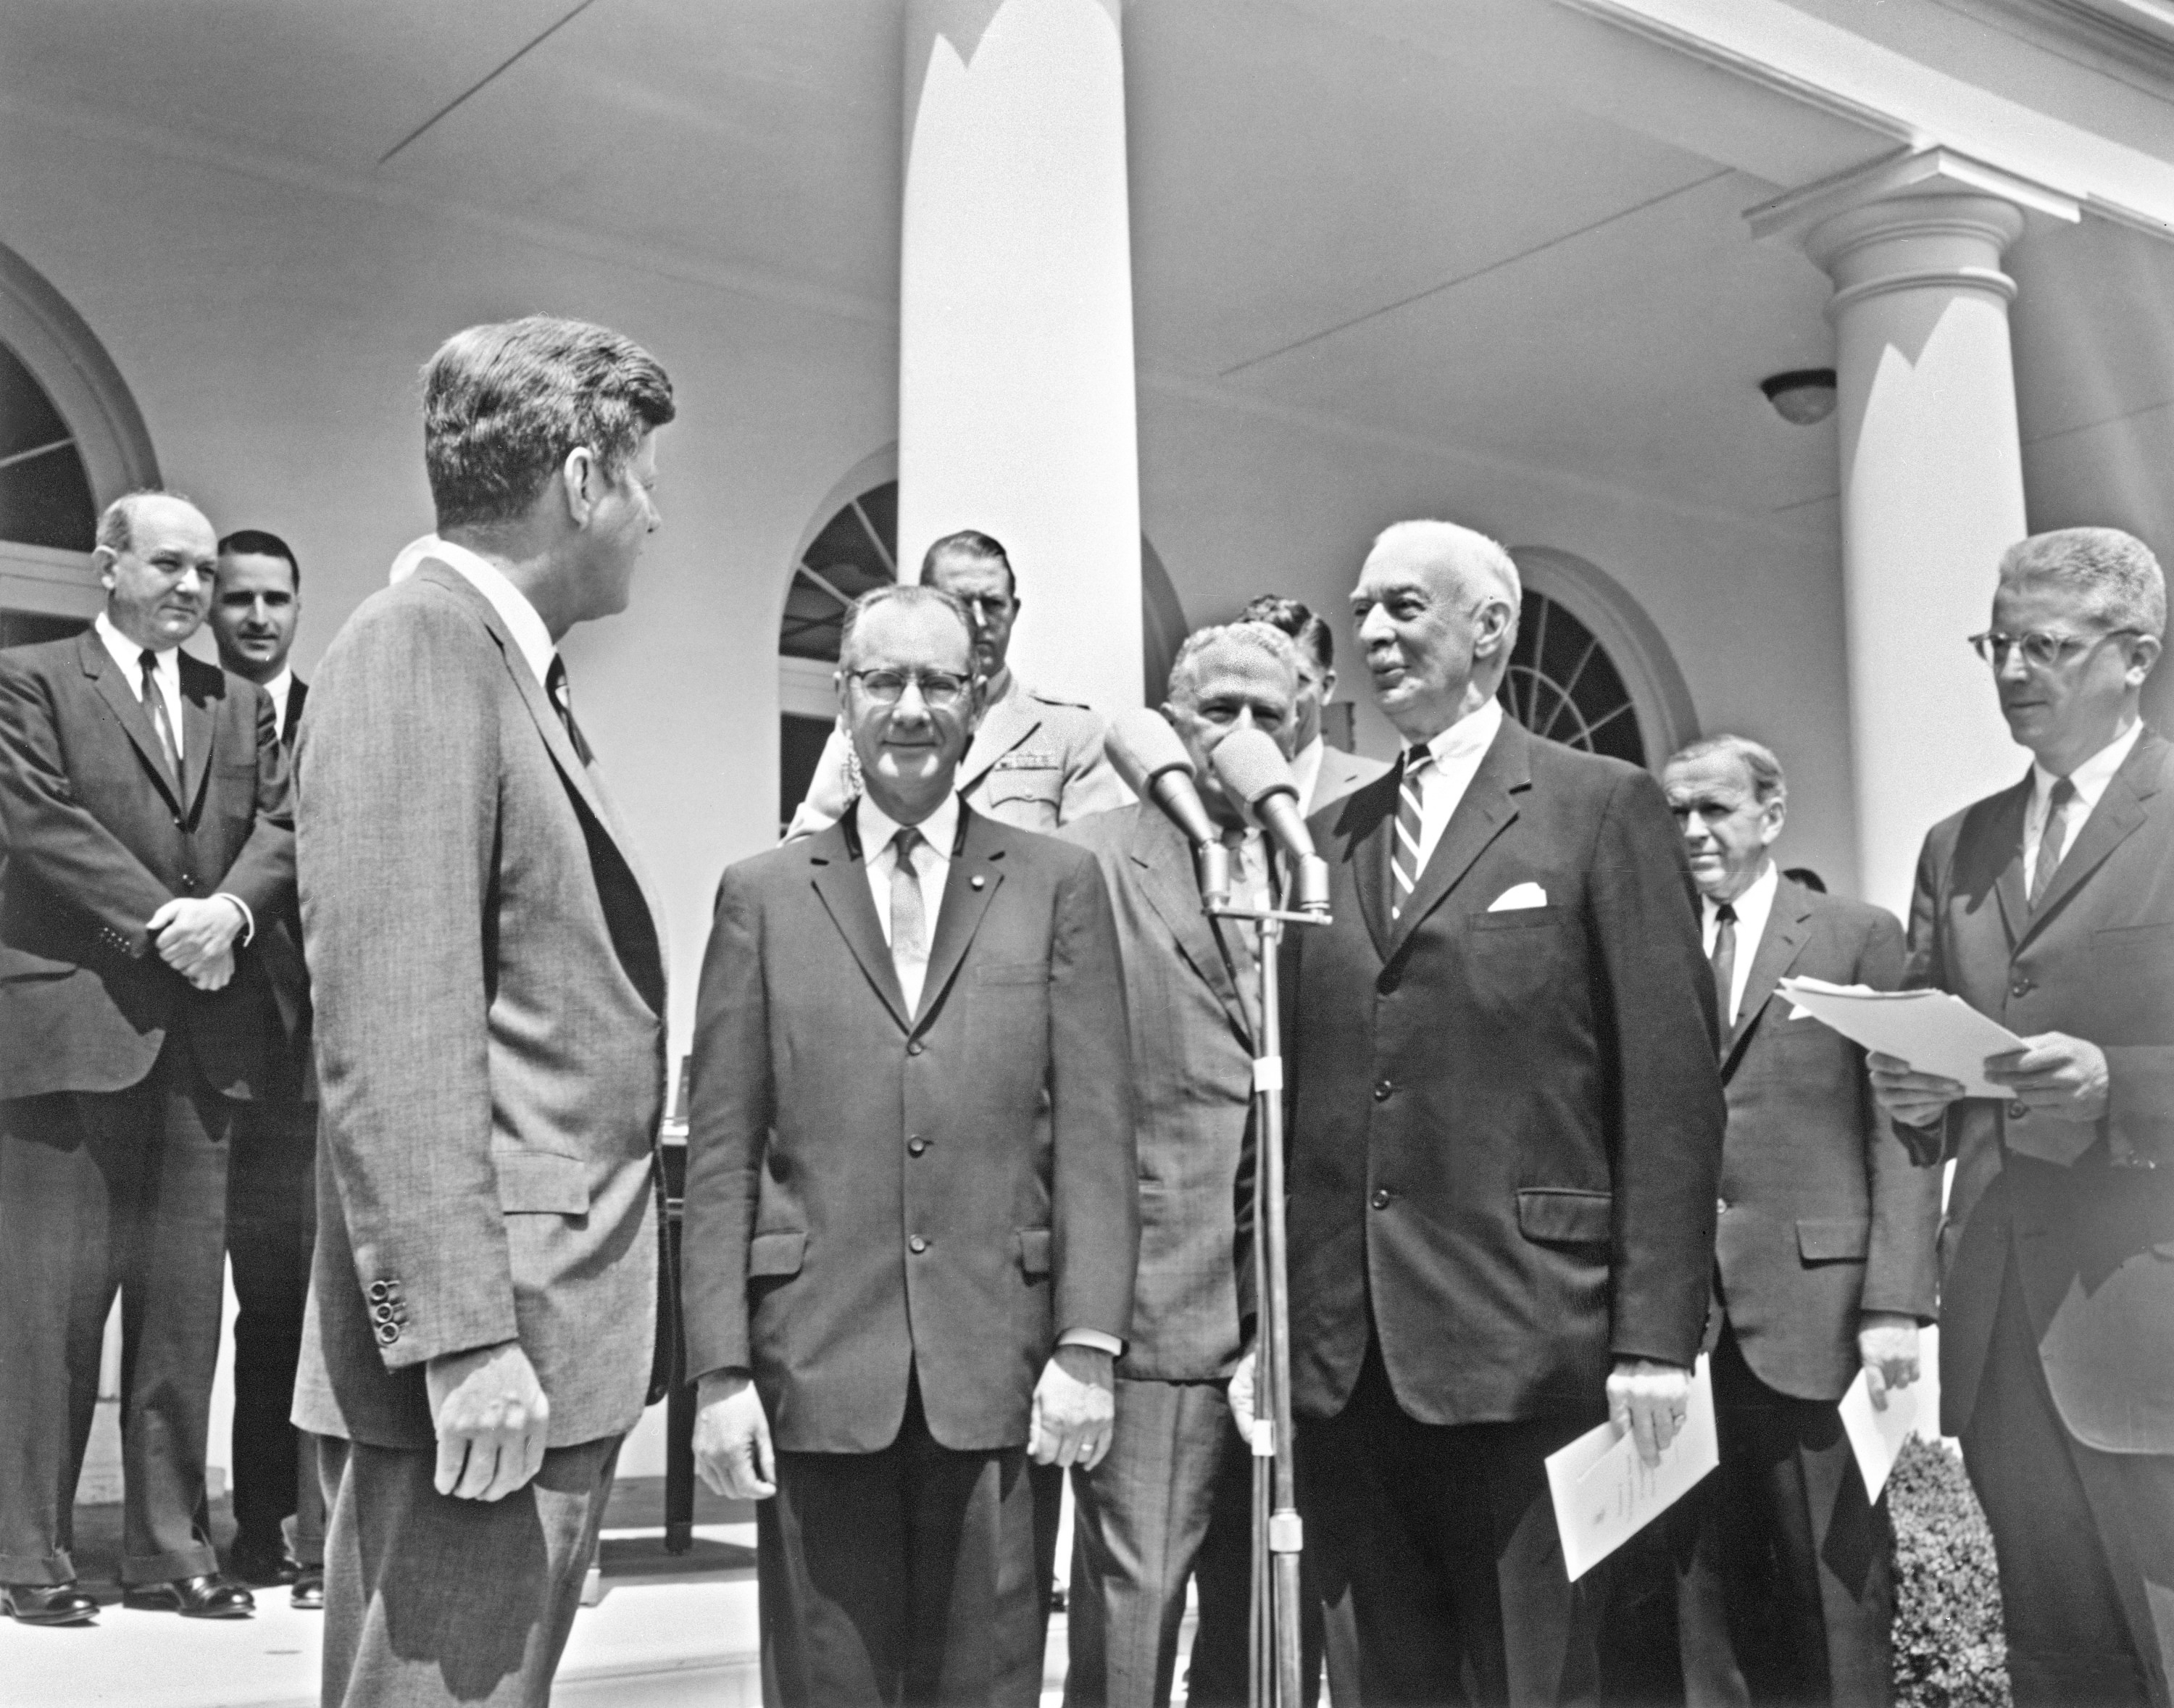 Former SAO Director Fred Lawrence Whipple stands between President John F. Kennedy and Secretary Leonard Carmichael outside the White House in the Rose Garden to recieve the "Distinguished Federal Civilian Award."